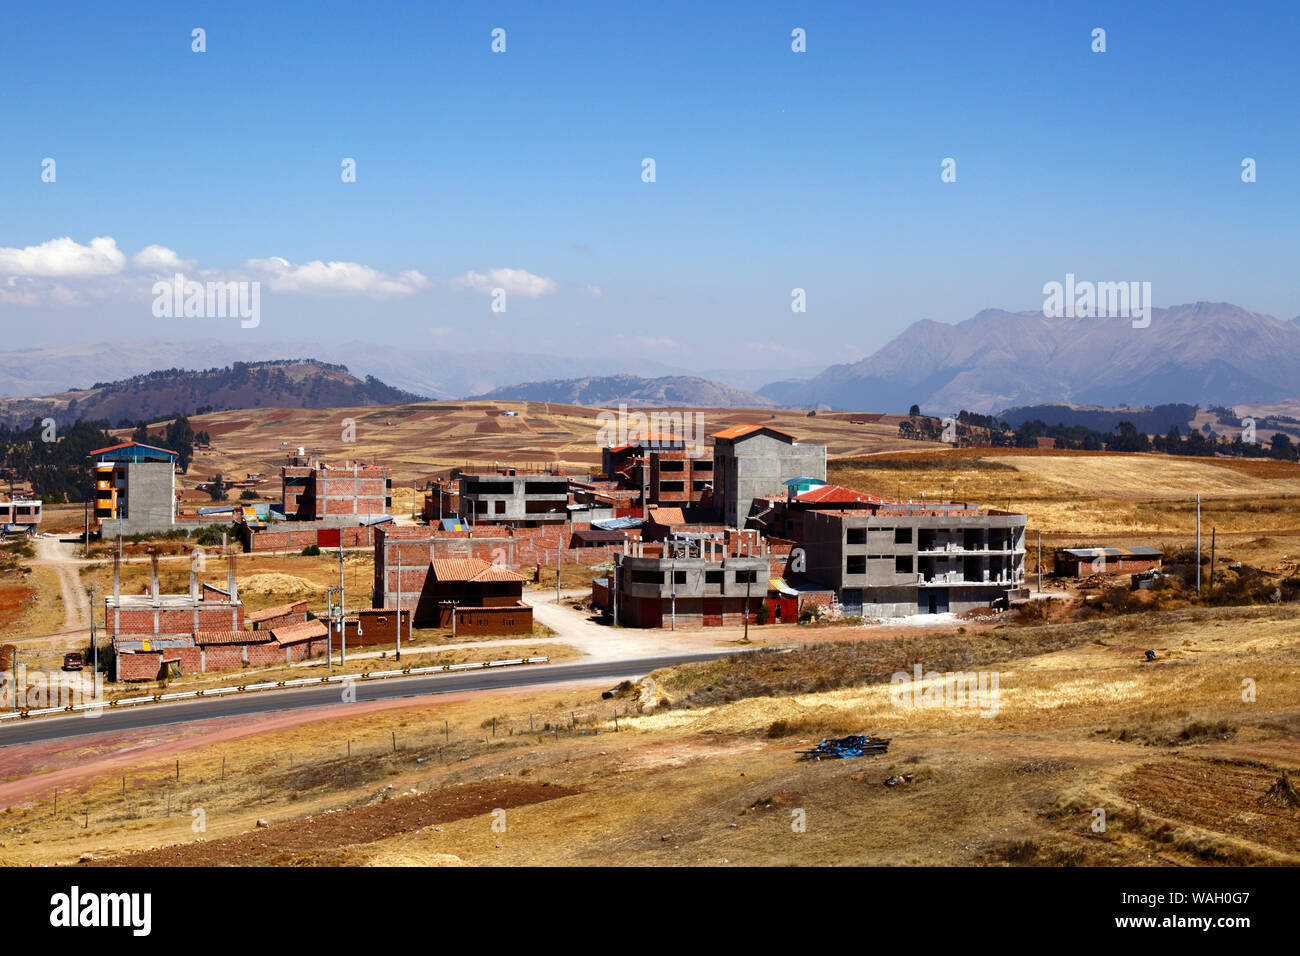 Buildings under construction at Nuevo Chinchero, near the original village of Chinchero, financed by compensation for land bought by the government from familiies for the construction of a new airport for Cusco and Machu Picchu, Cusco Region, Peru Stock Photo